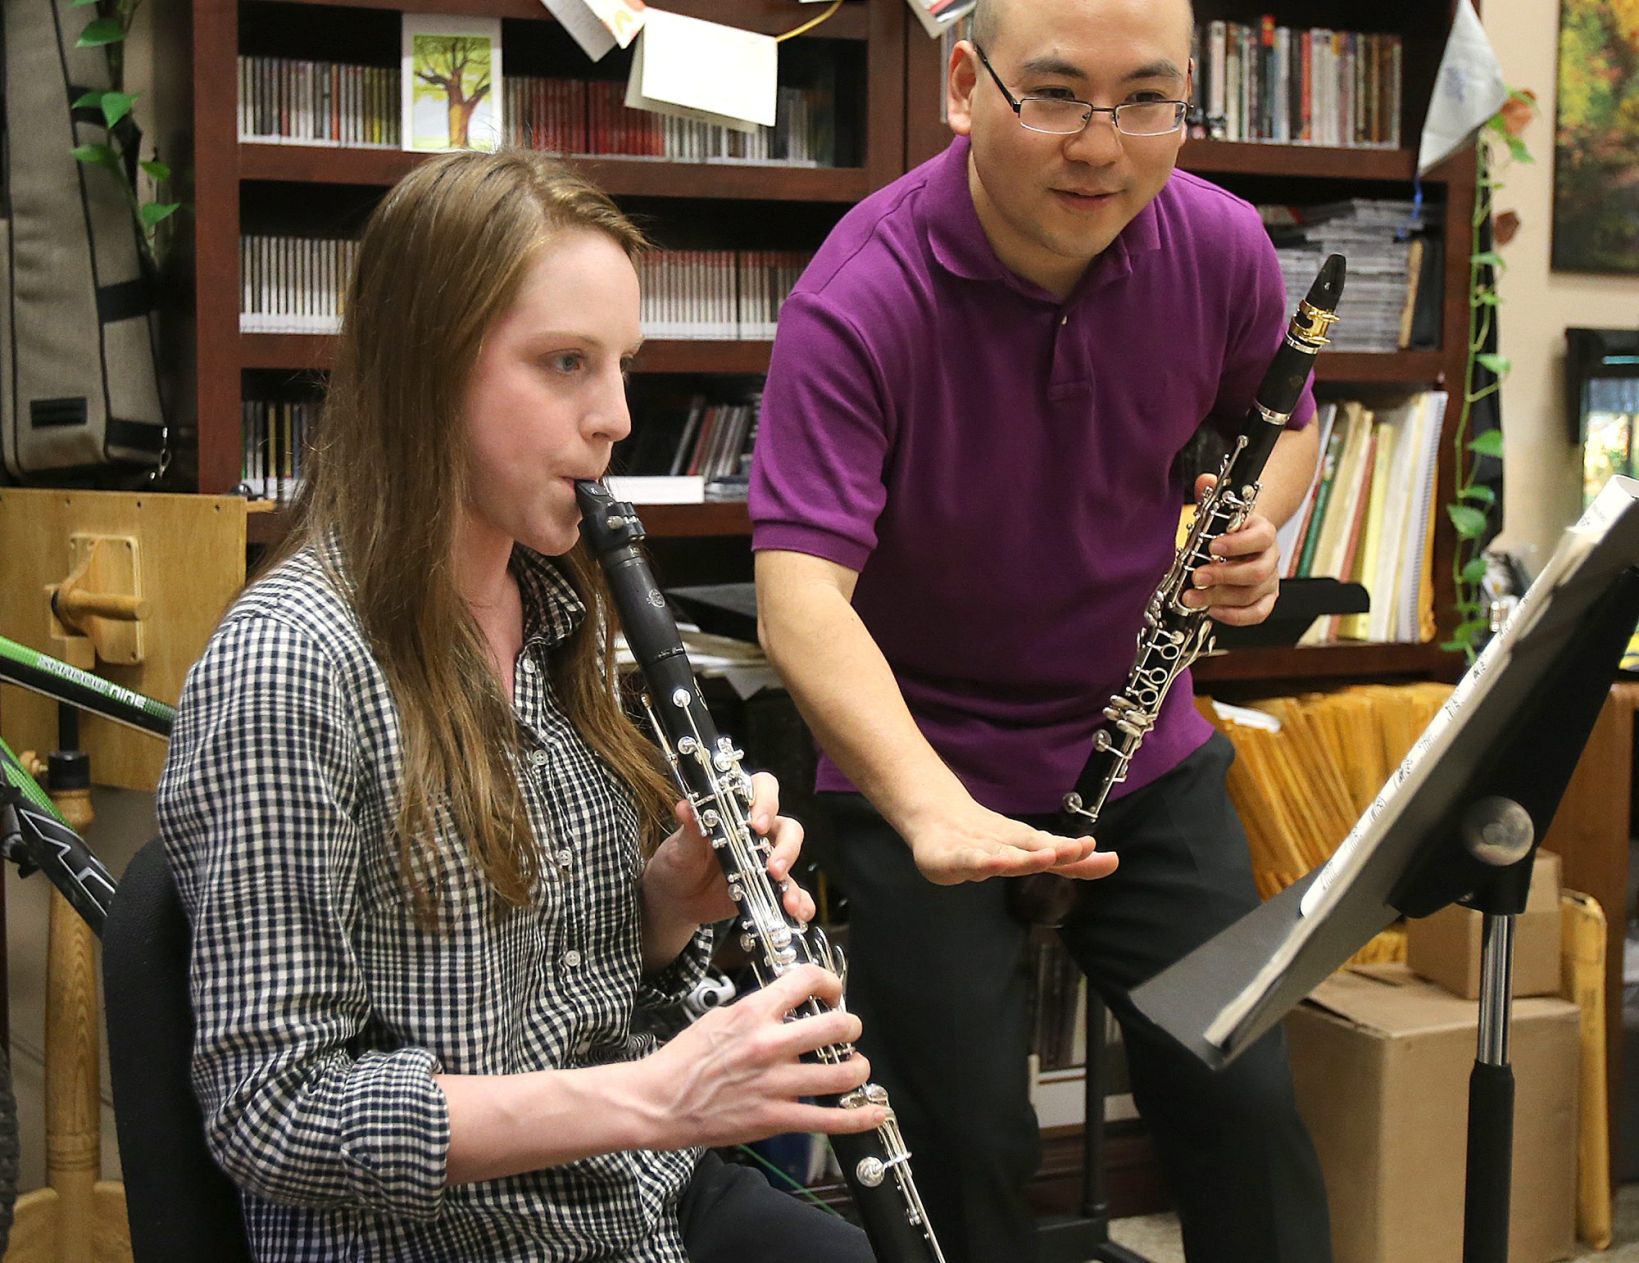 Baylor freshman fulfilling music dreams after tragic accident ...